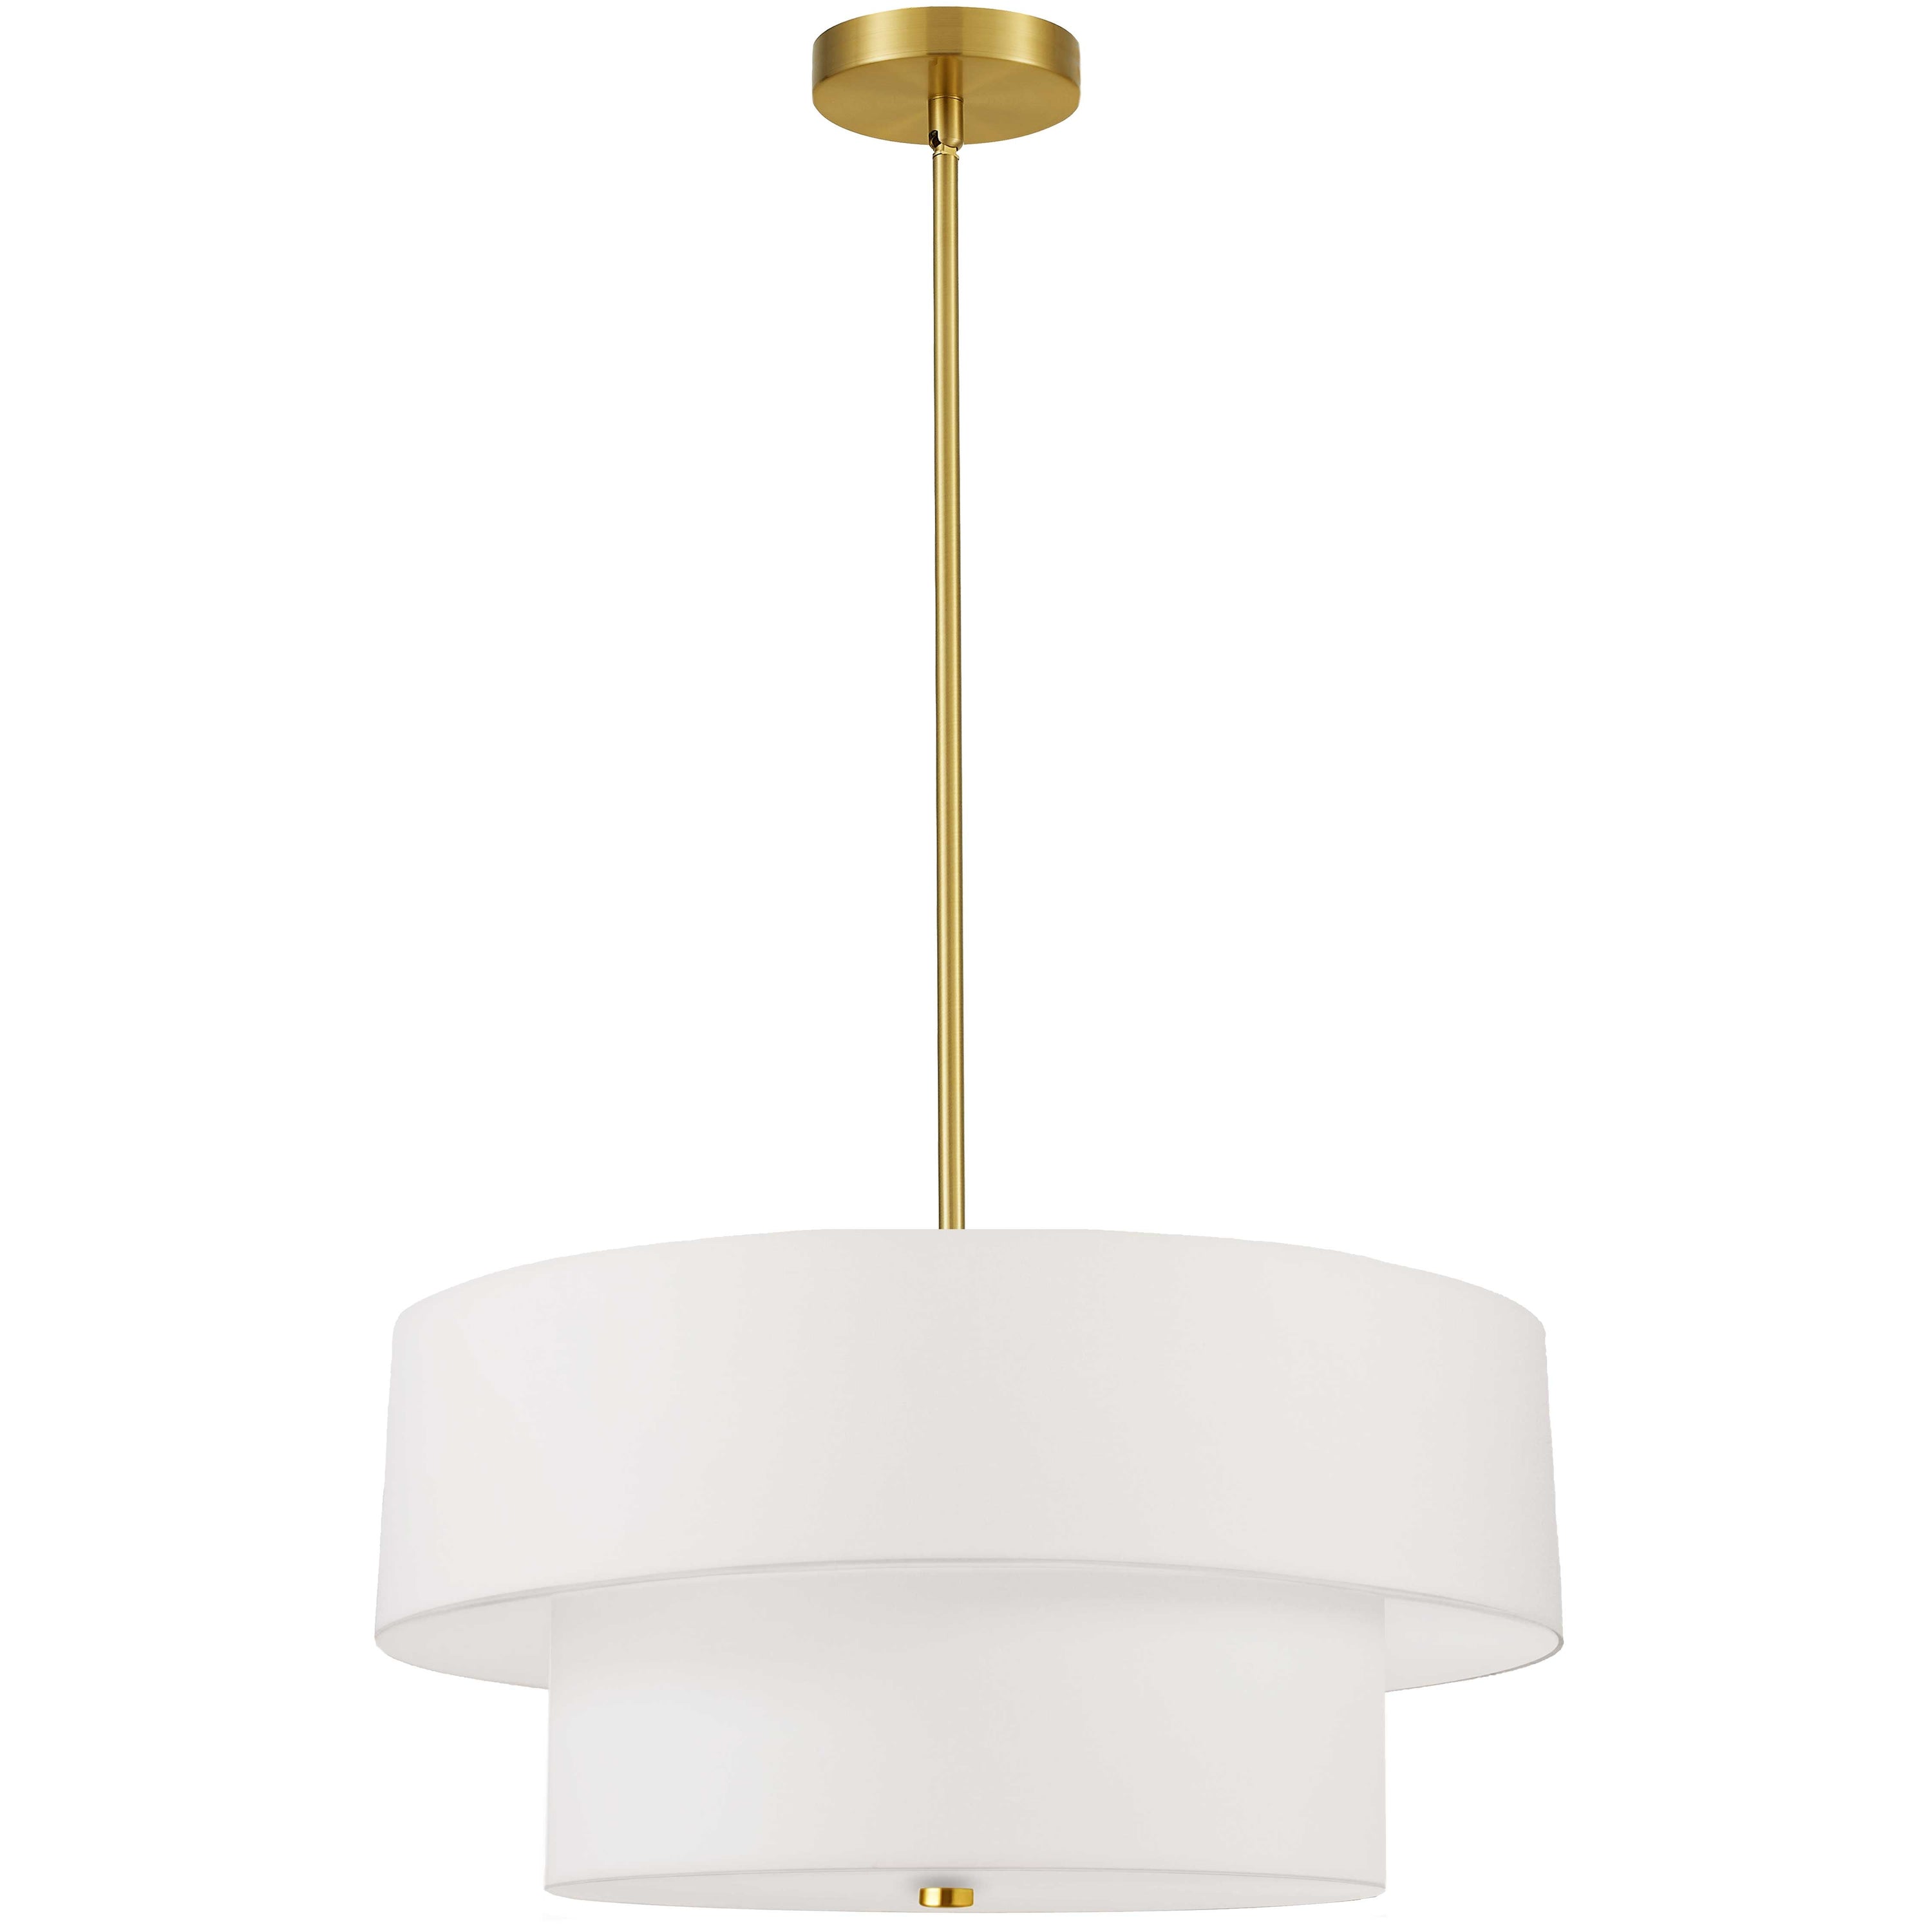 Dainolite Everly - 571-224P-AGB-WH - 4 Light 2 Tier Pendant, Aged Brass with White Shade - Aged Brass